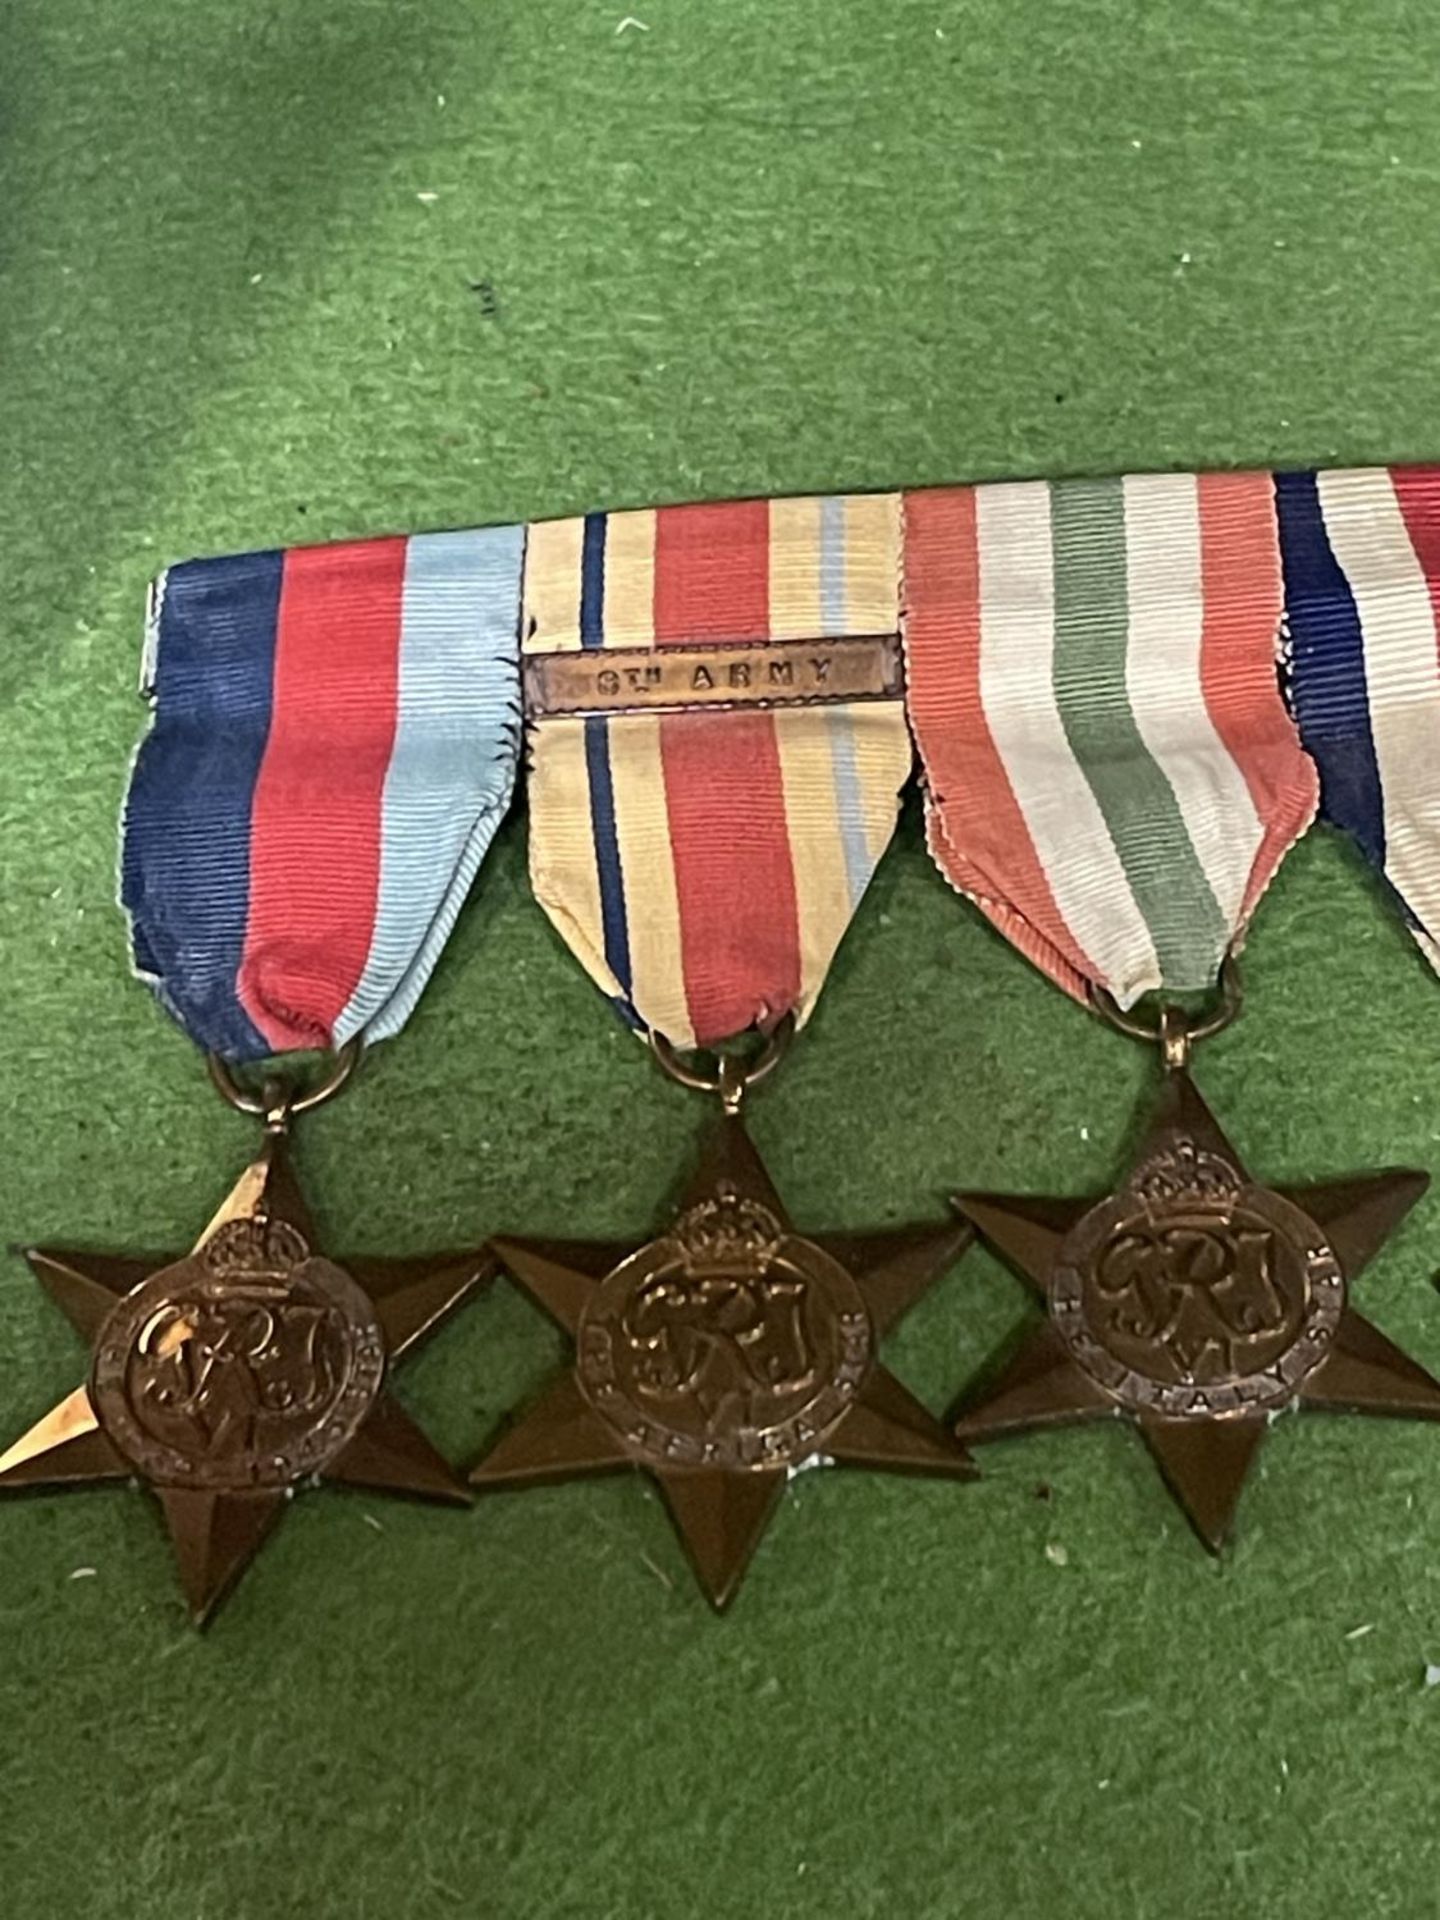 A WORLD WAR II MEDAL GROUP COMPRISING 1938-45 STAR, AFRICA STAR, 8TH ARMY CLASP, ITALY STAR, - Image 3 of 4